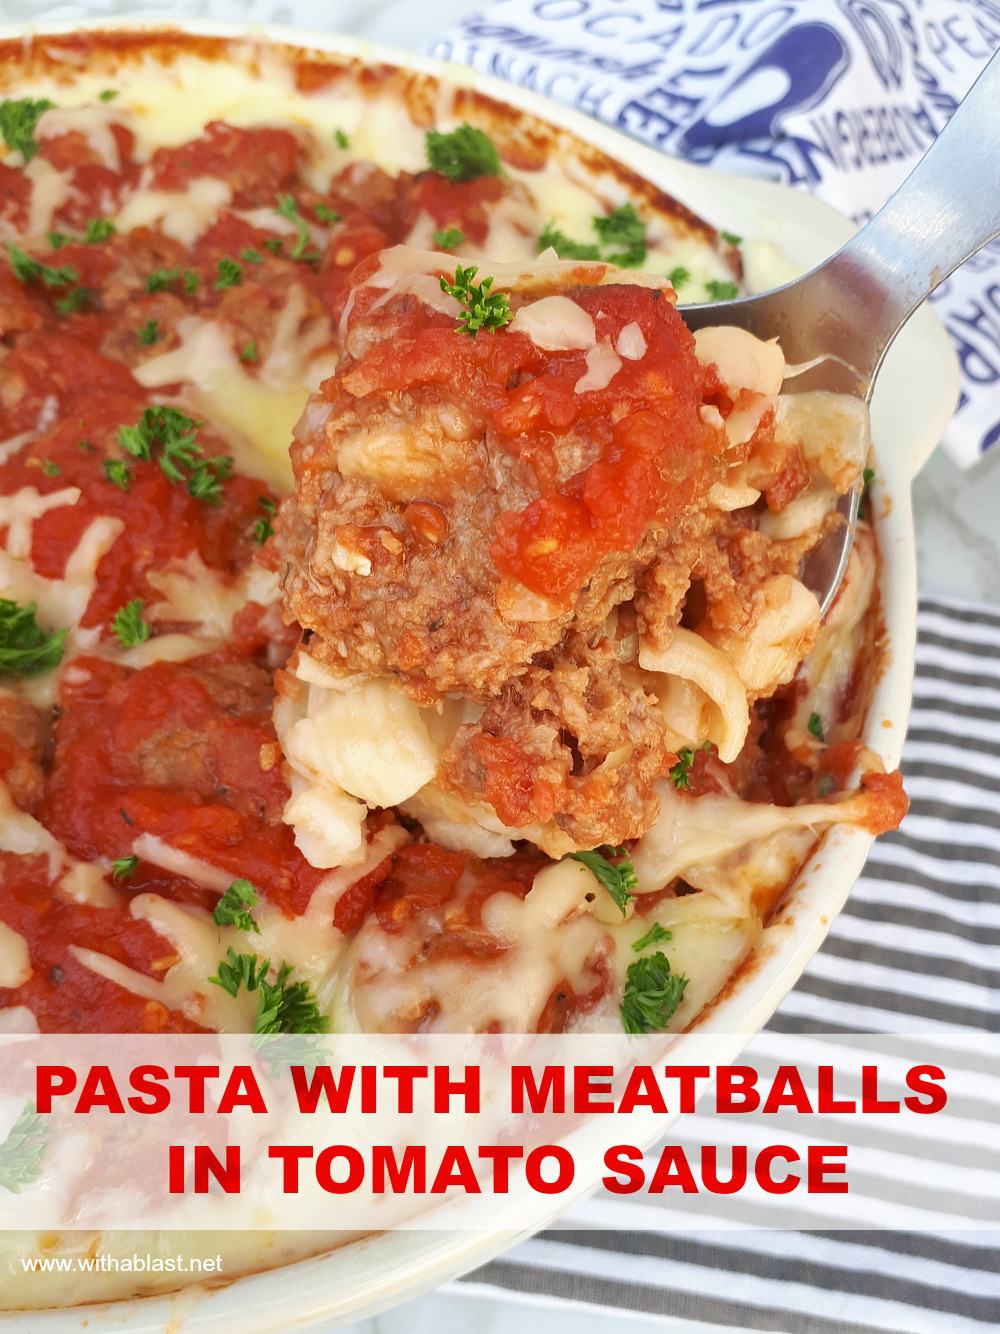 Pasta and Meatballs in Tomato Sauce